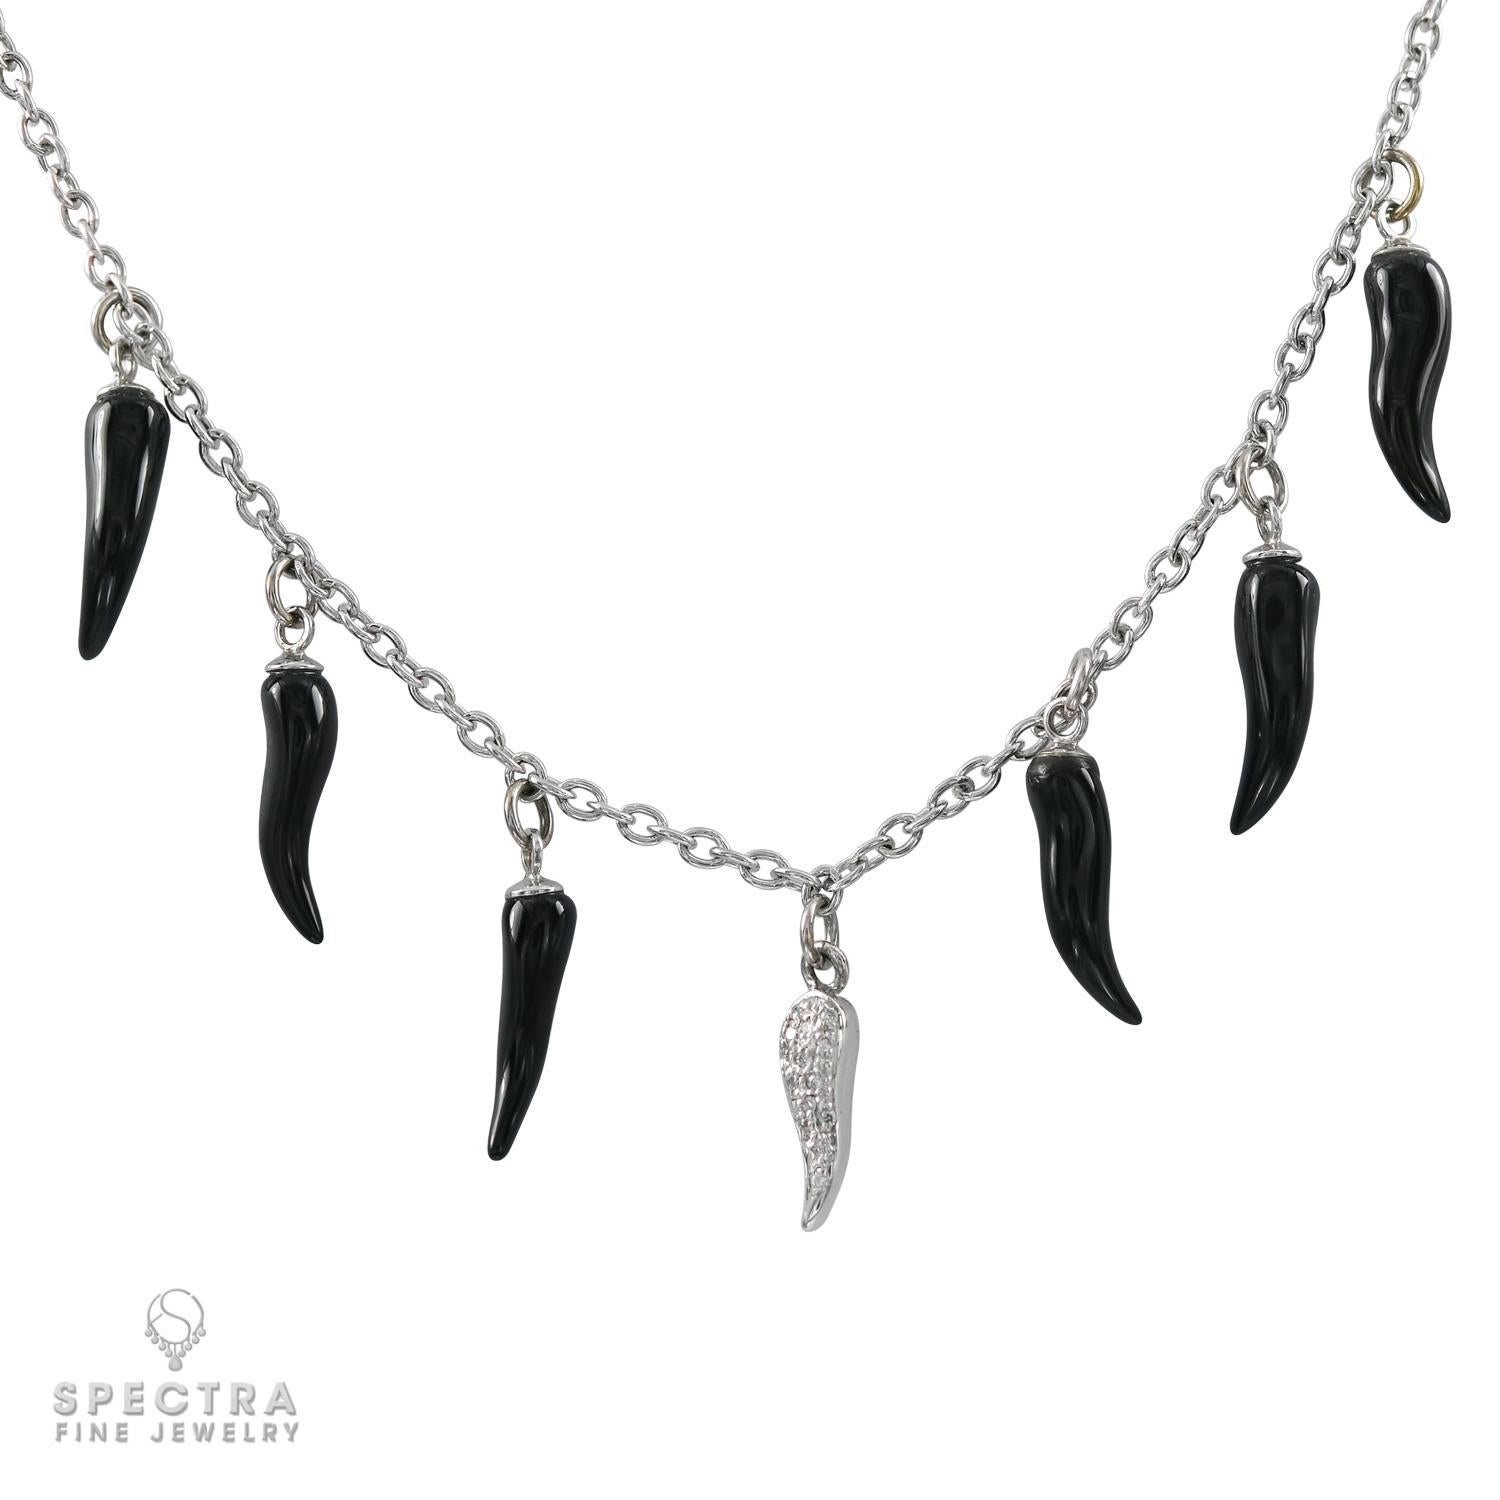 cornicello necklace meaning